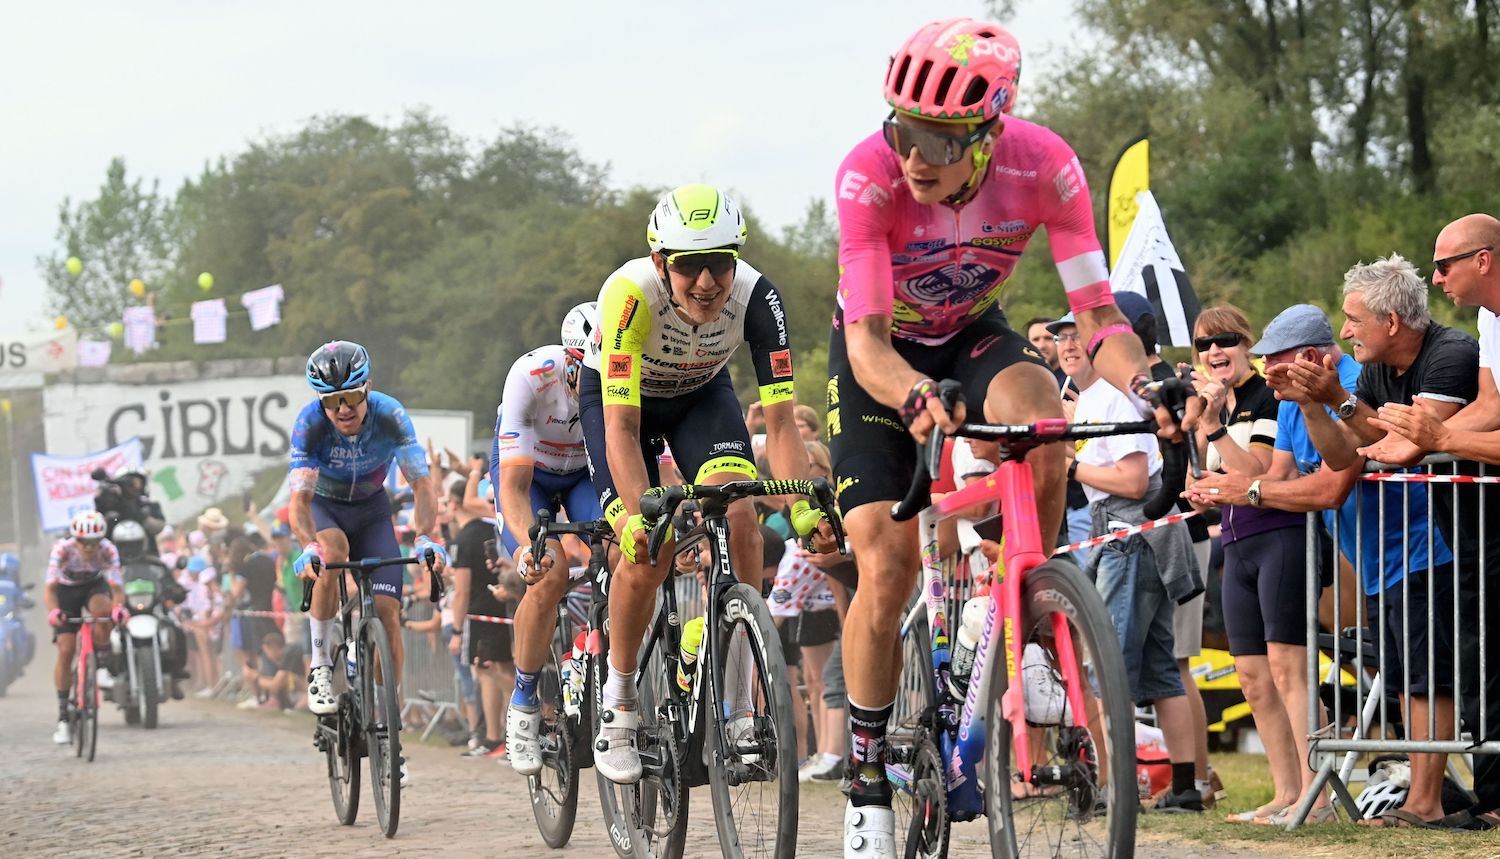 Australian Simon Clarke of Israel-Premier Tech, Dutch Taco van der Hoorn of Intermarche Wanty-Gobert Materiaux and USï¿¿ Neilson Powless of EF Education-EasyPost pictured in action during stage five of the Tour de France cycling race, a 155 km race from Lille Metropole to Arenberg porte du Hainaut, France on Wednesday 06 July 2022. This year's Tour de France takes place from 01 to 24 July 2022. BELGA PHOTO DAVID STOCKMAN - UK OUT (Photo by DAVID STOCKMAN / BELGA MAG / Belga via AFP) (Photo by DAVID STOCKMAN/BELGA MAG/AFP via Getty Images)